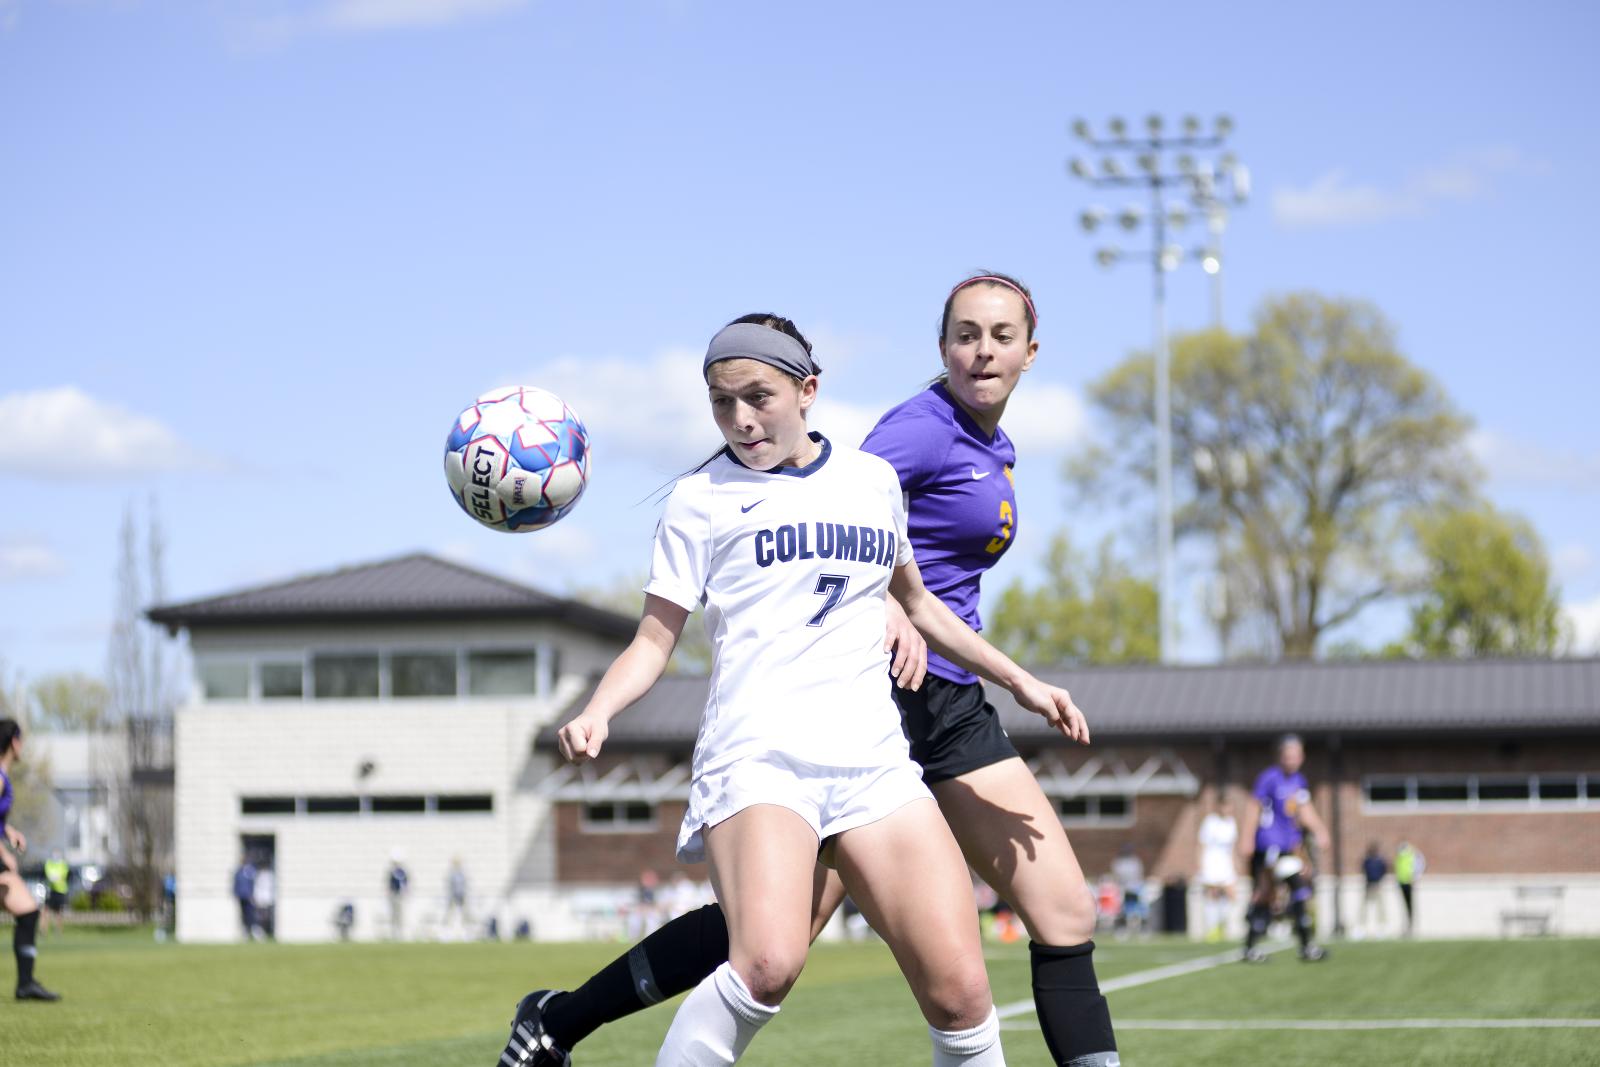 Columbia College women&rsquo;s soccer team beats Kansas Wesleyan University 3-0 after the game went into double overtime. The score was still 0-0 afterwards so the game went to penalty kicks.